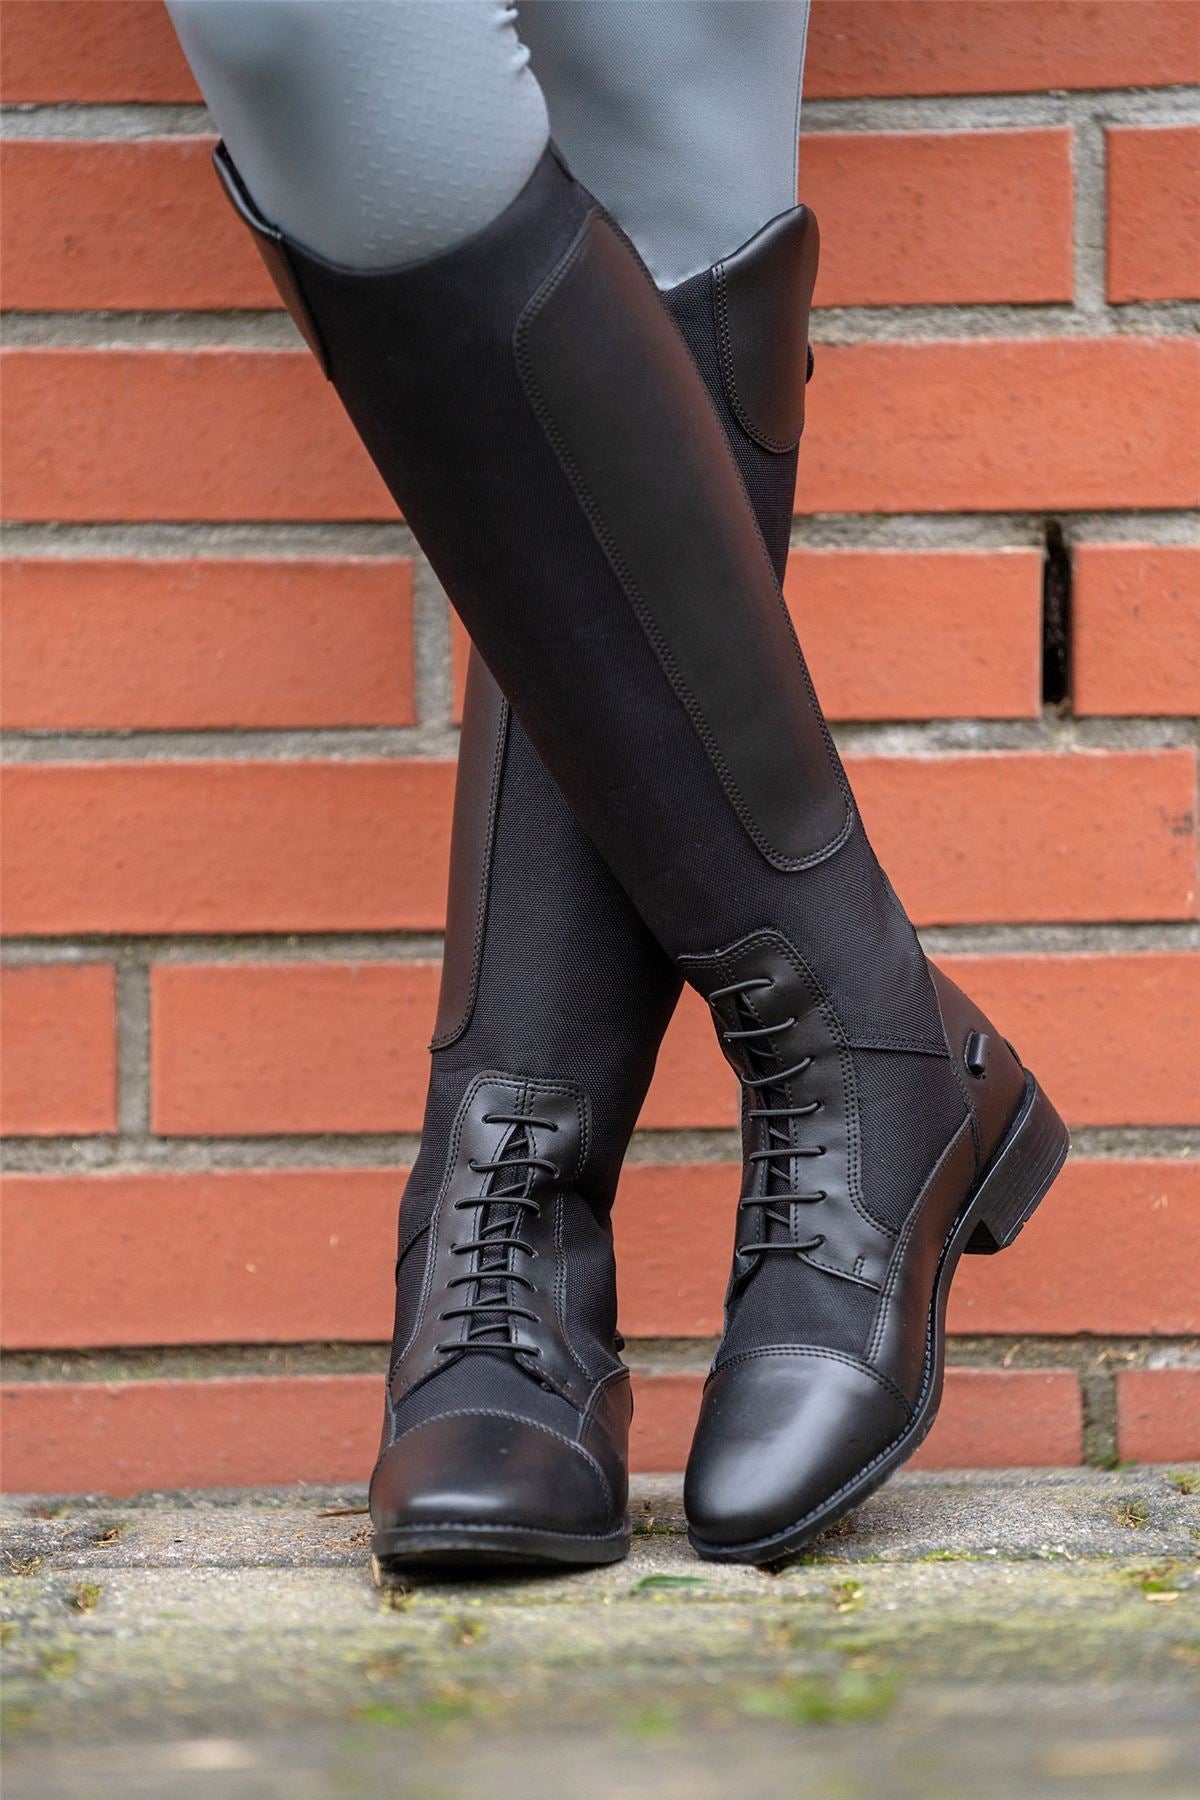 HKM Riding Boots Syntex Standard, Width L - Just Horse Riders